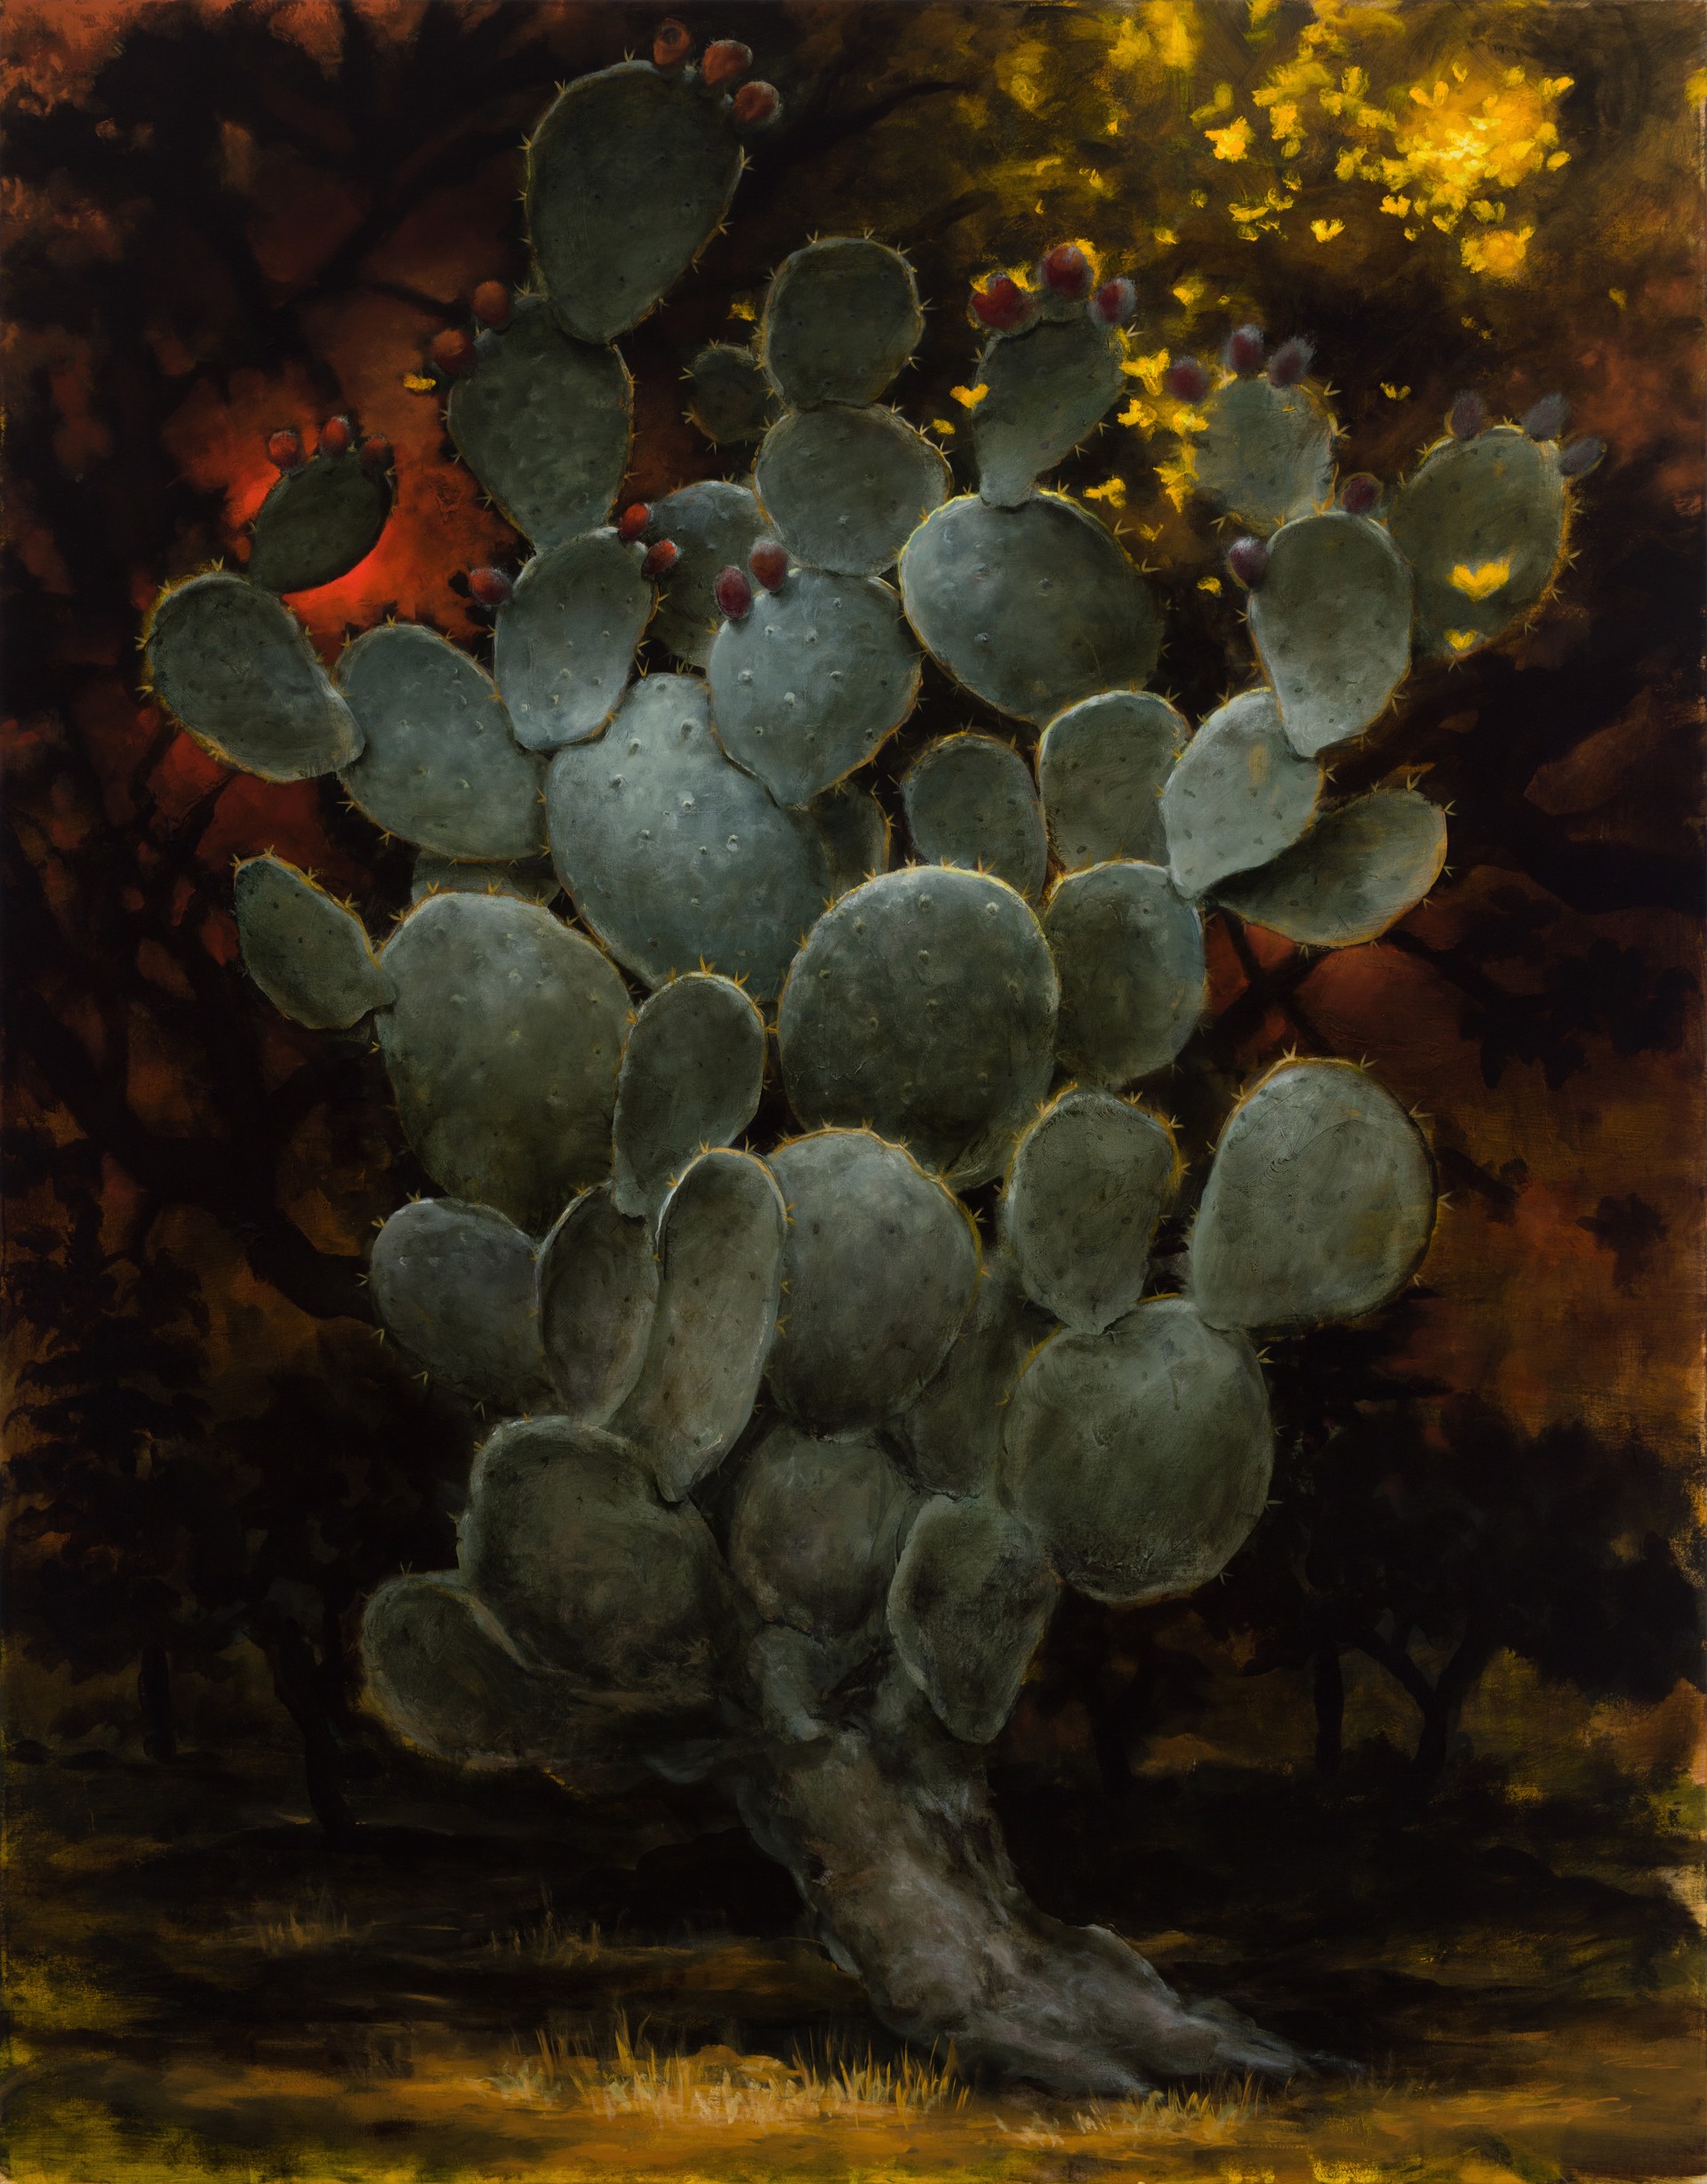 St. Opuntia of the Bees by Kevin Sloan